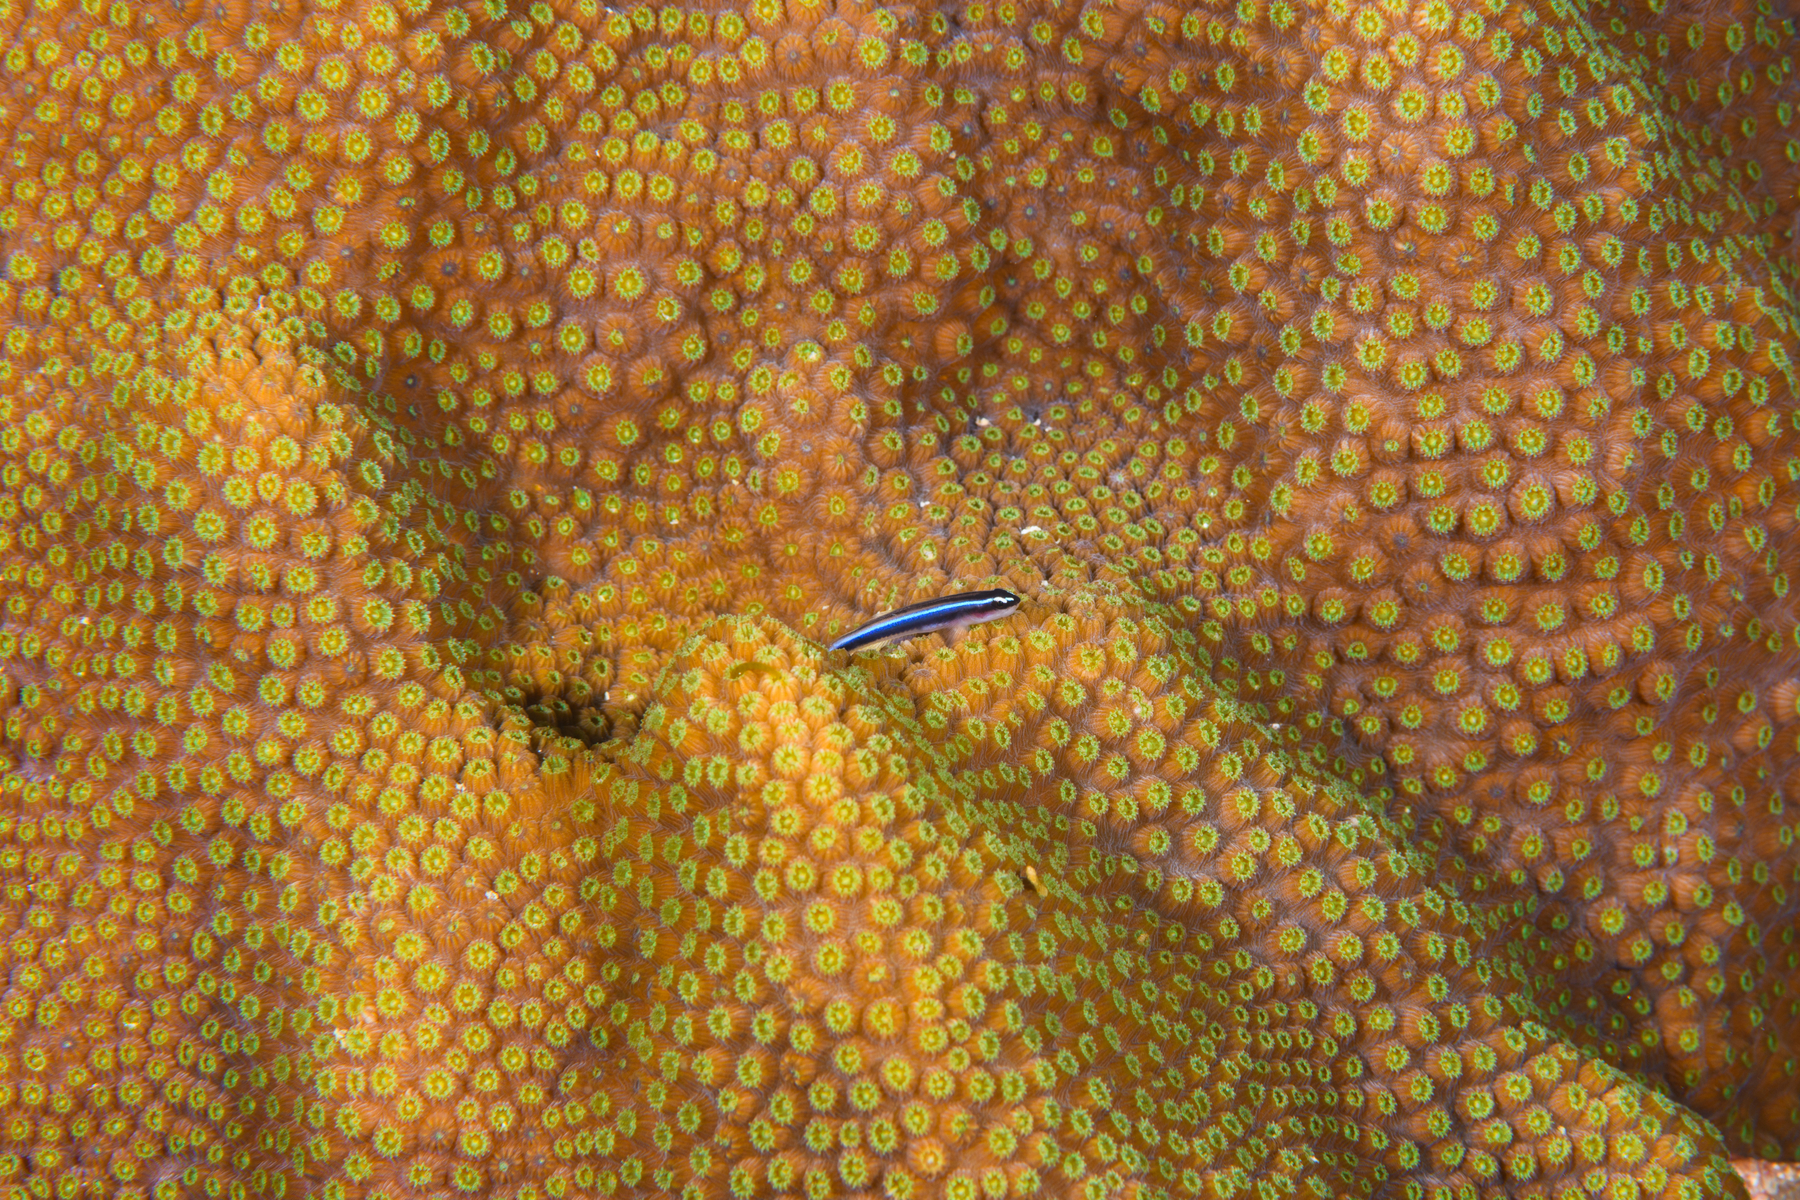 9/26/2021Neon Goby on coral.